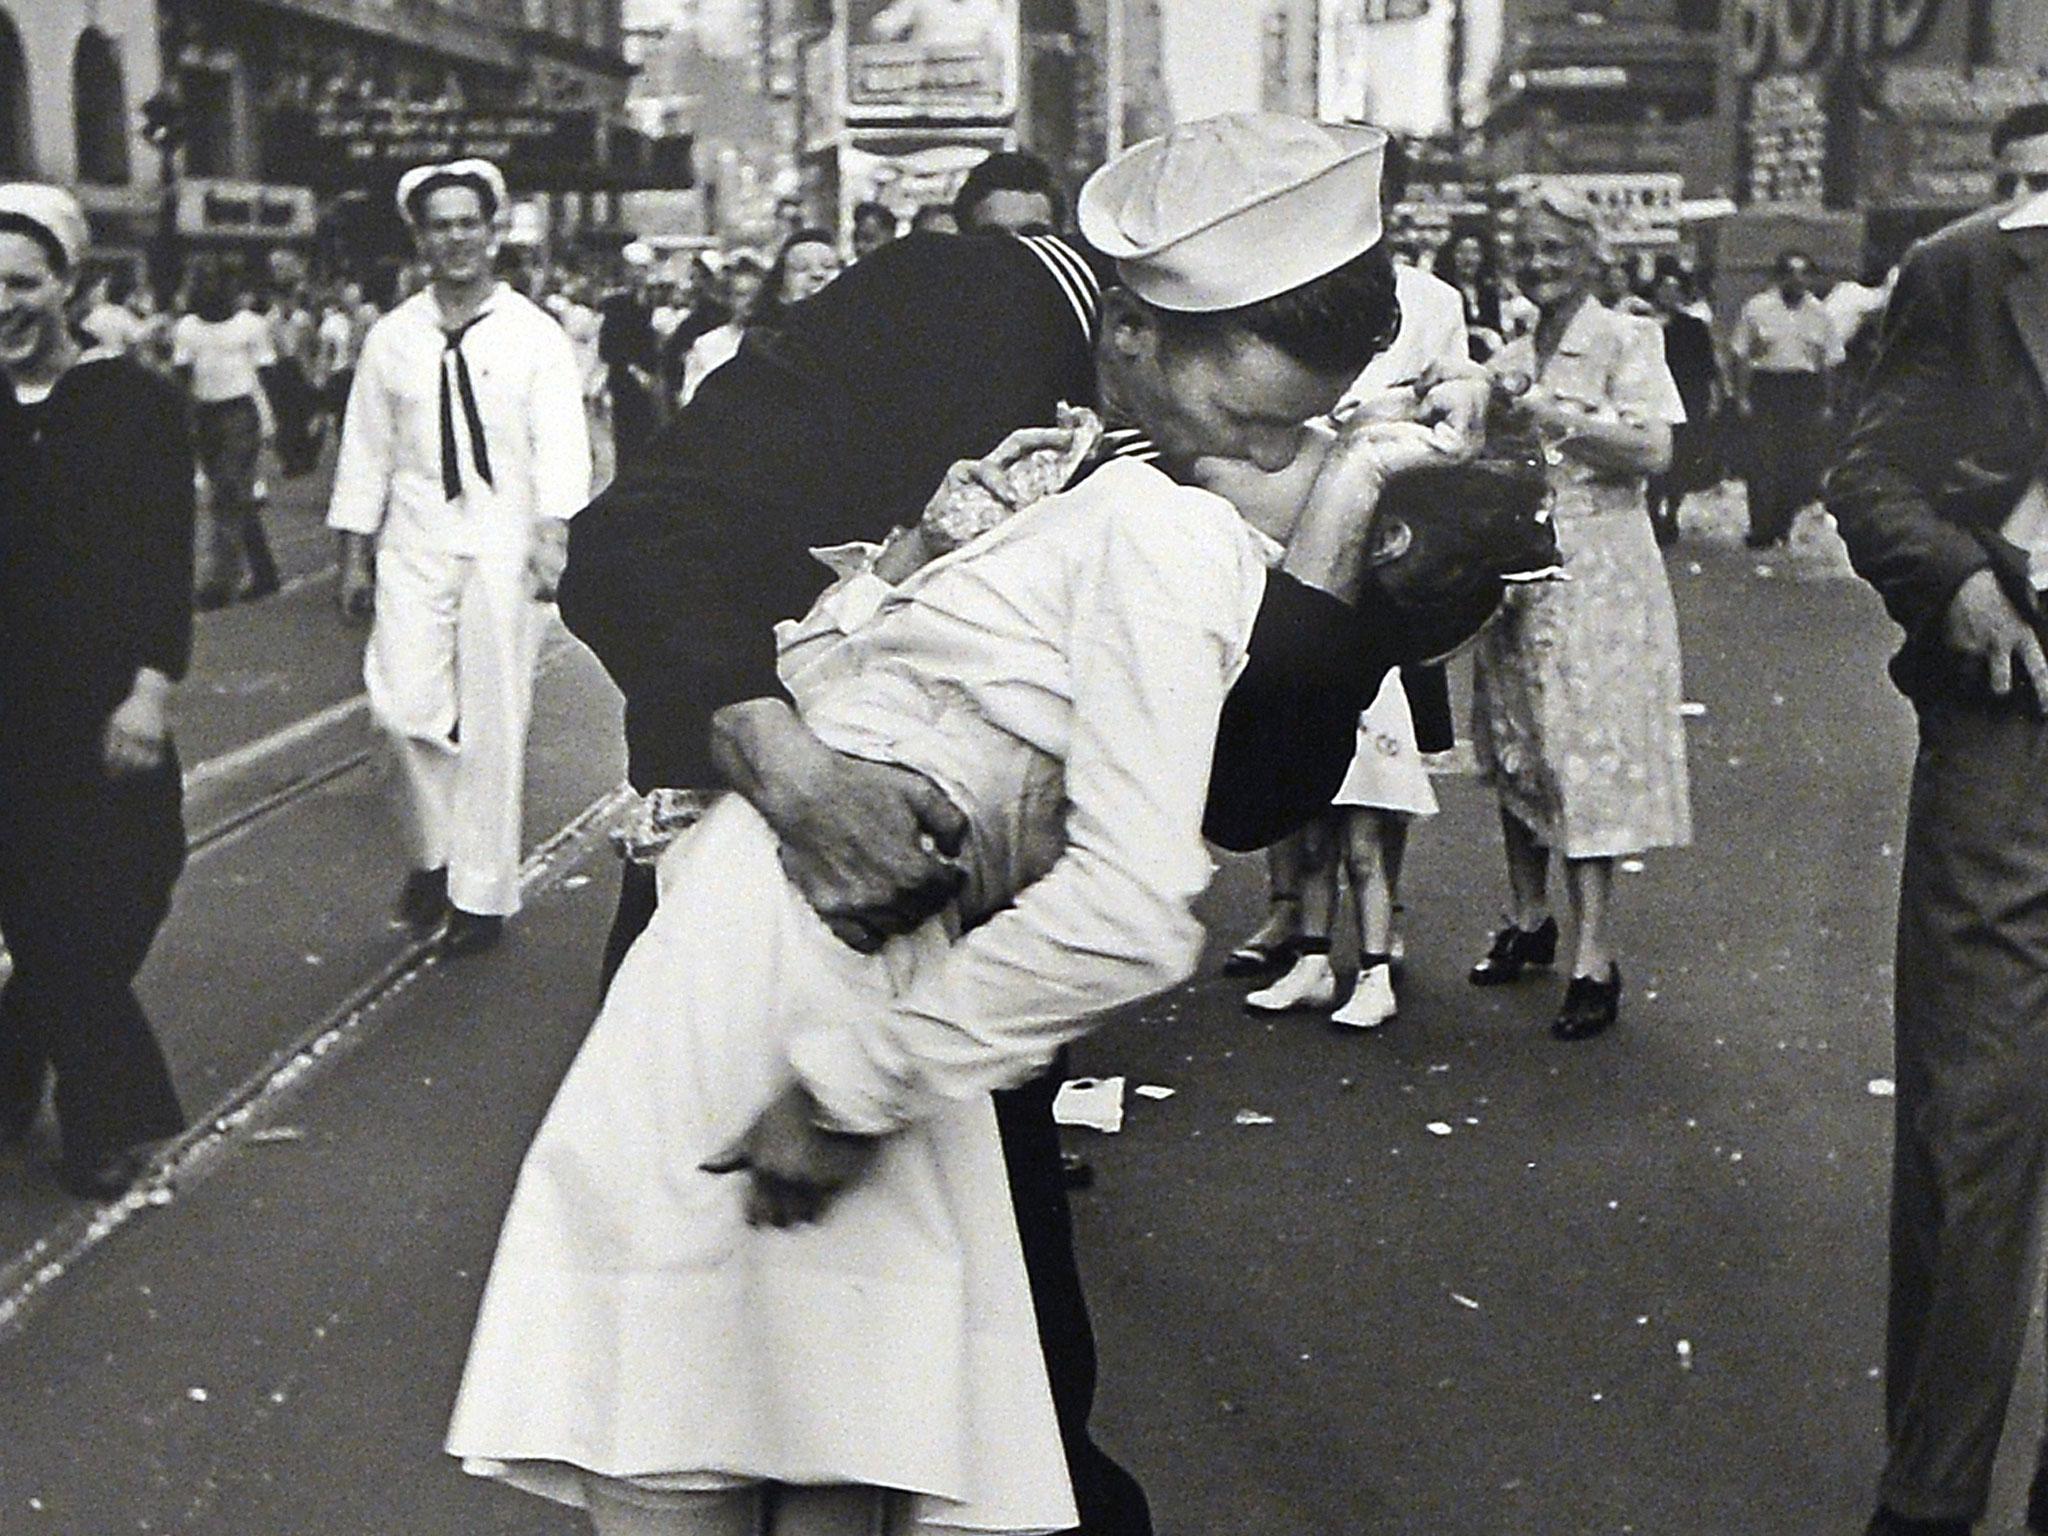 Sailor Who Kissed A Nurse In Famous Wwii Photograph Dies Aged 86 The Independent